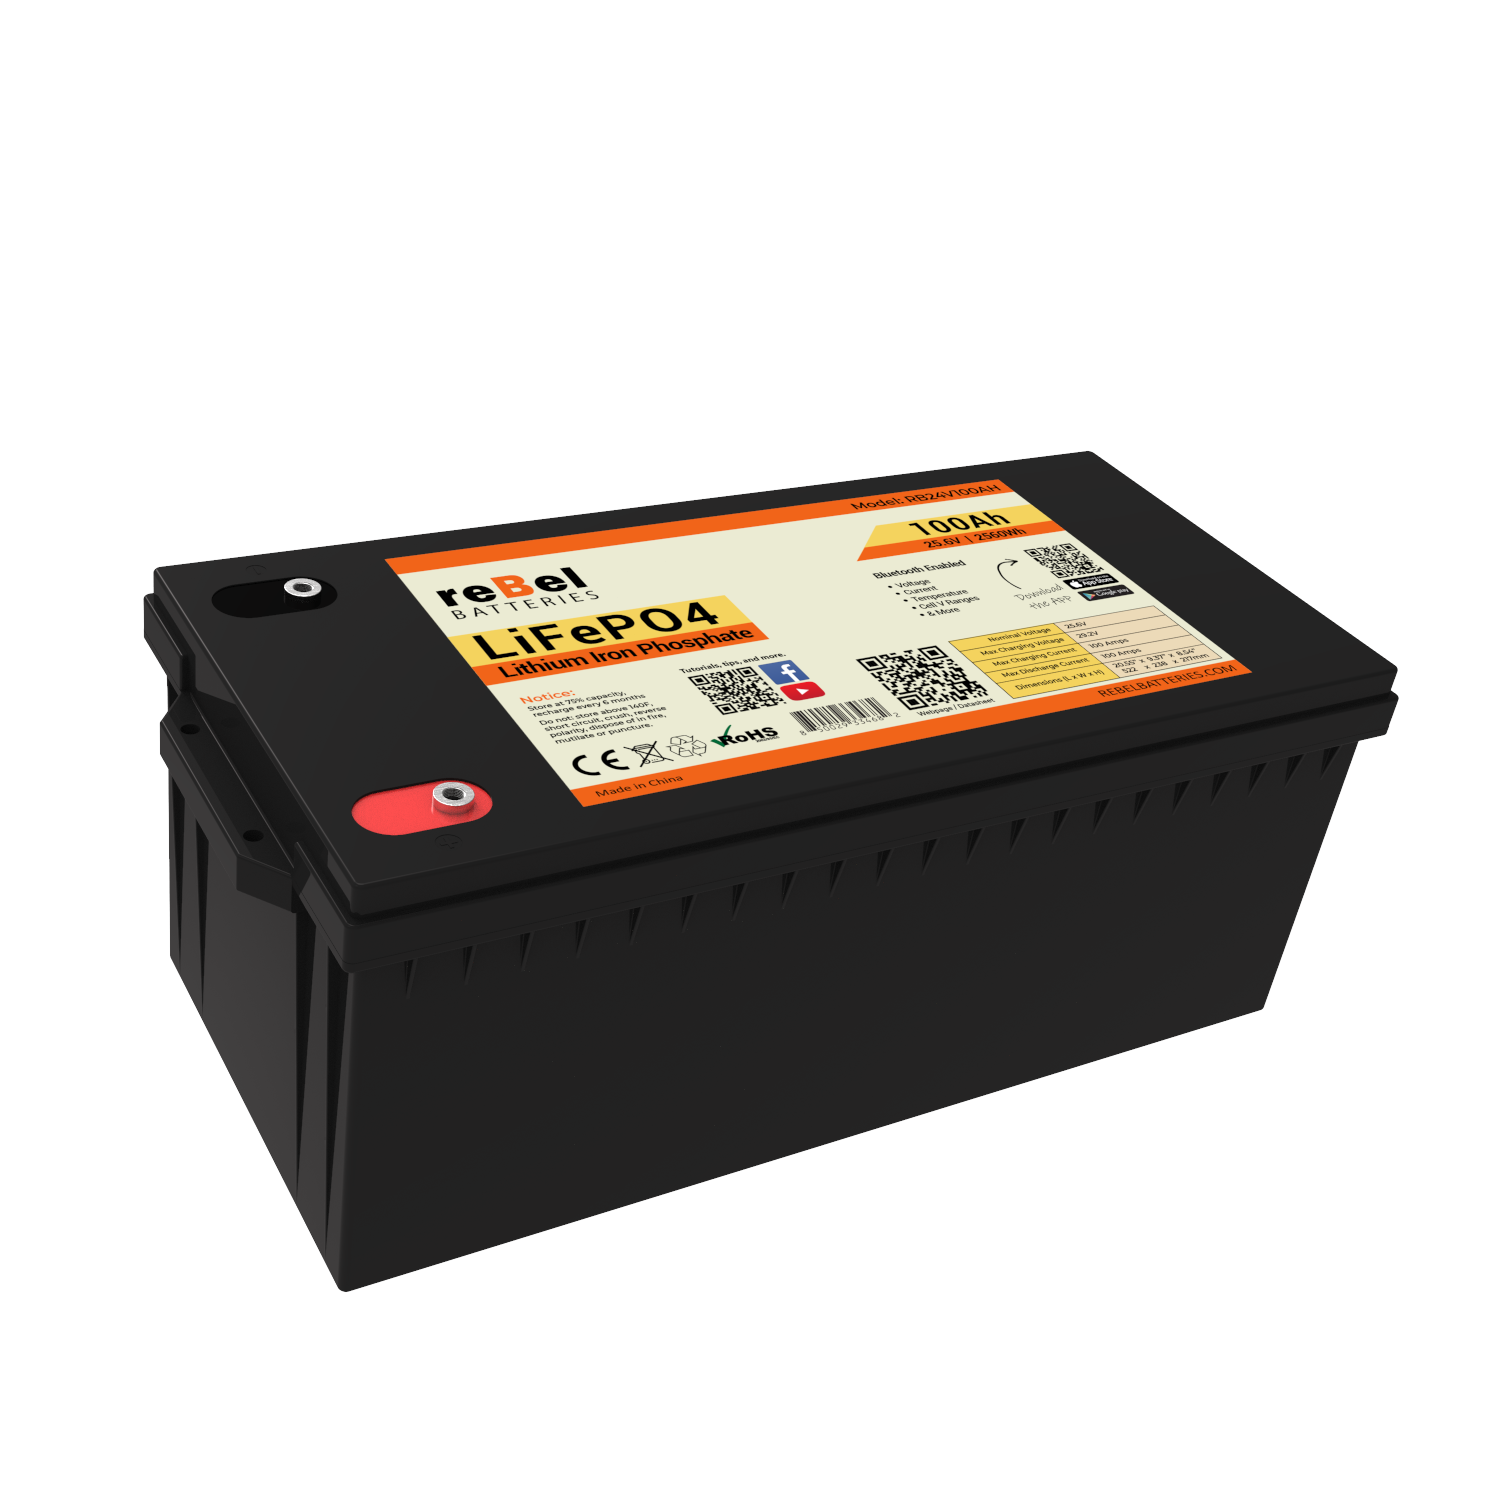 24V 100AH LiFePO4 Smart Bluetooth Enabled Rechargeable Lithium Iron Phosphate Battery